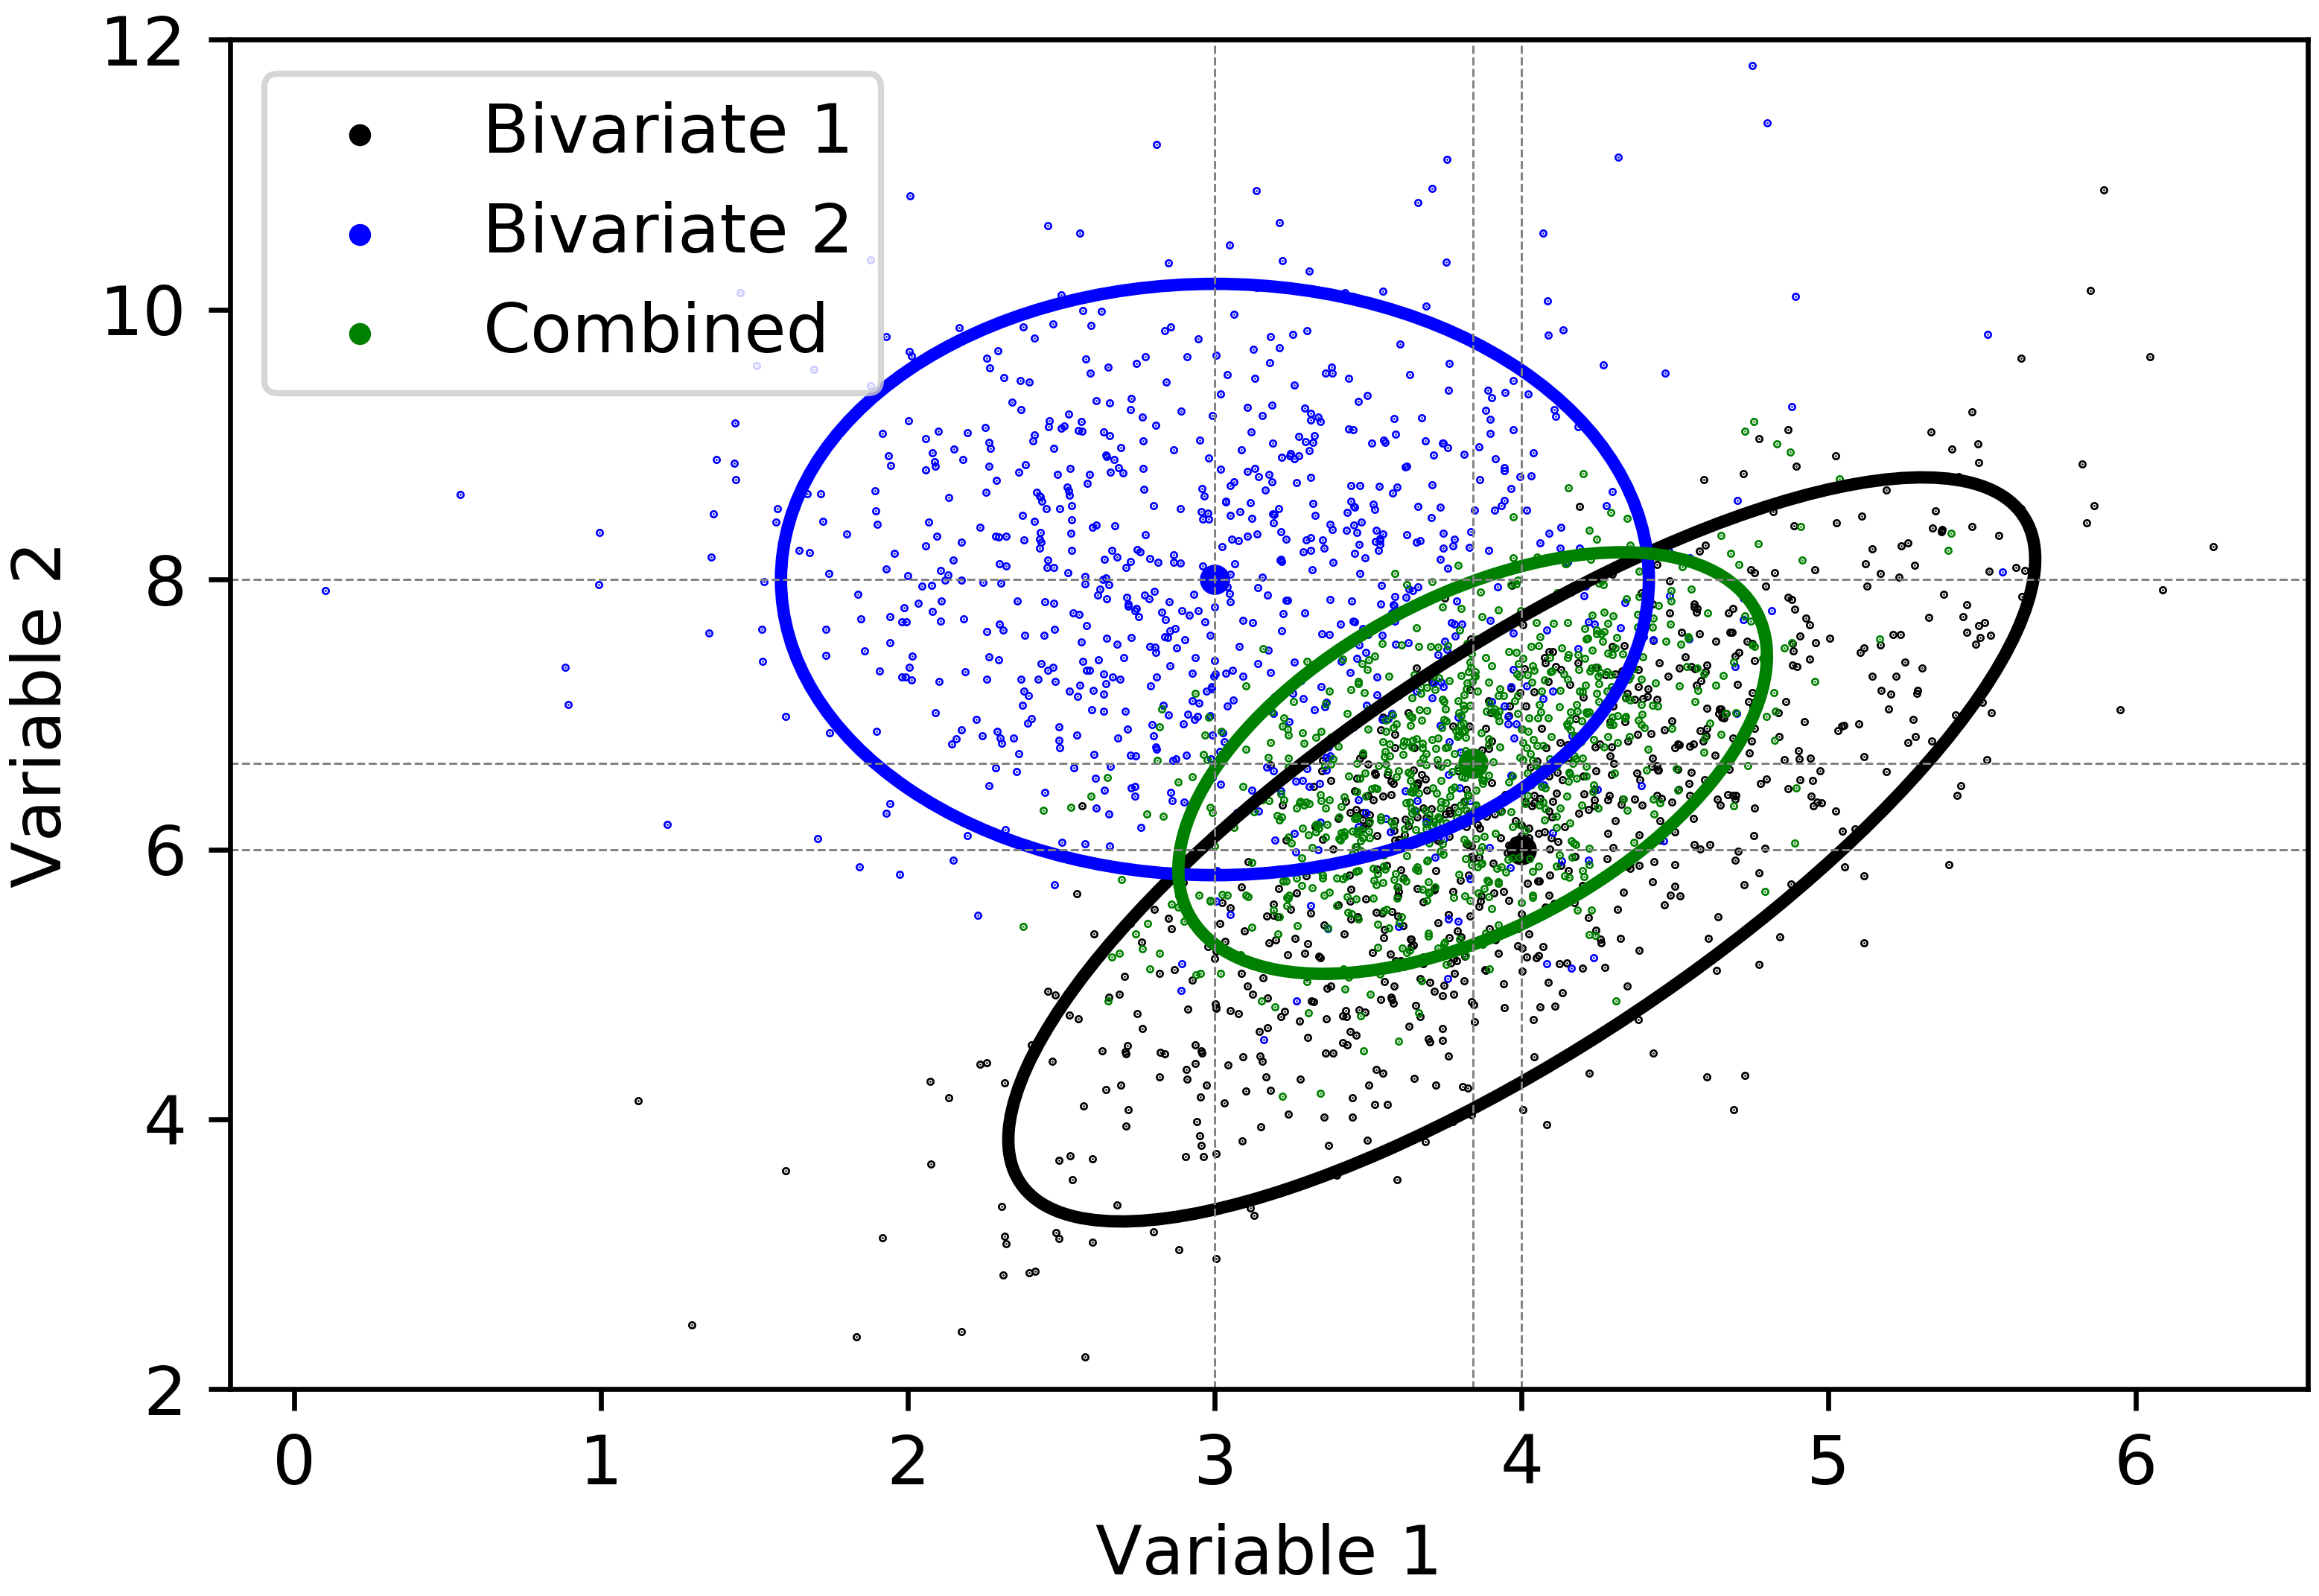 95\% confidence ellipses of the bivariate Gaussian distributions and the combined distribution